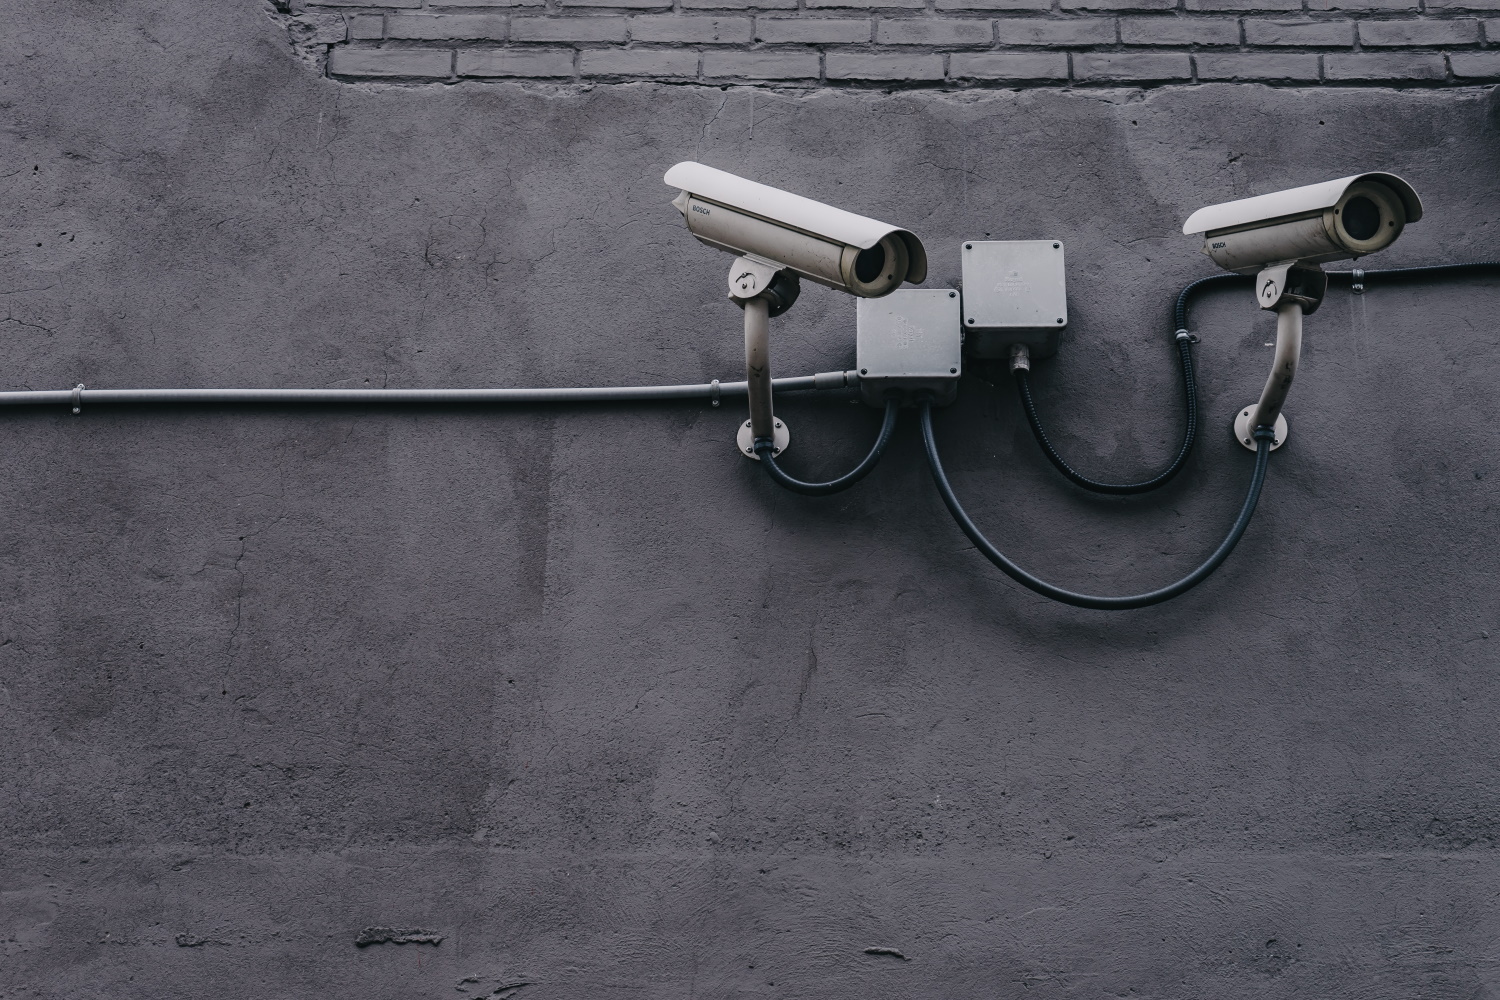 CCTV cameras mounted to a wall